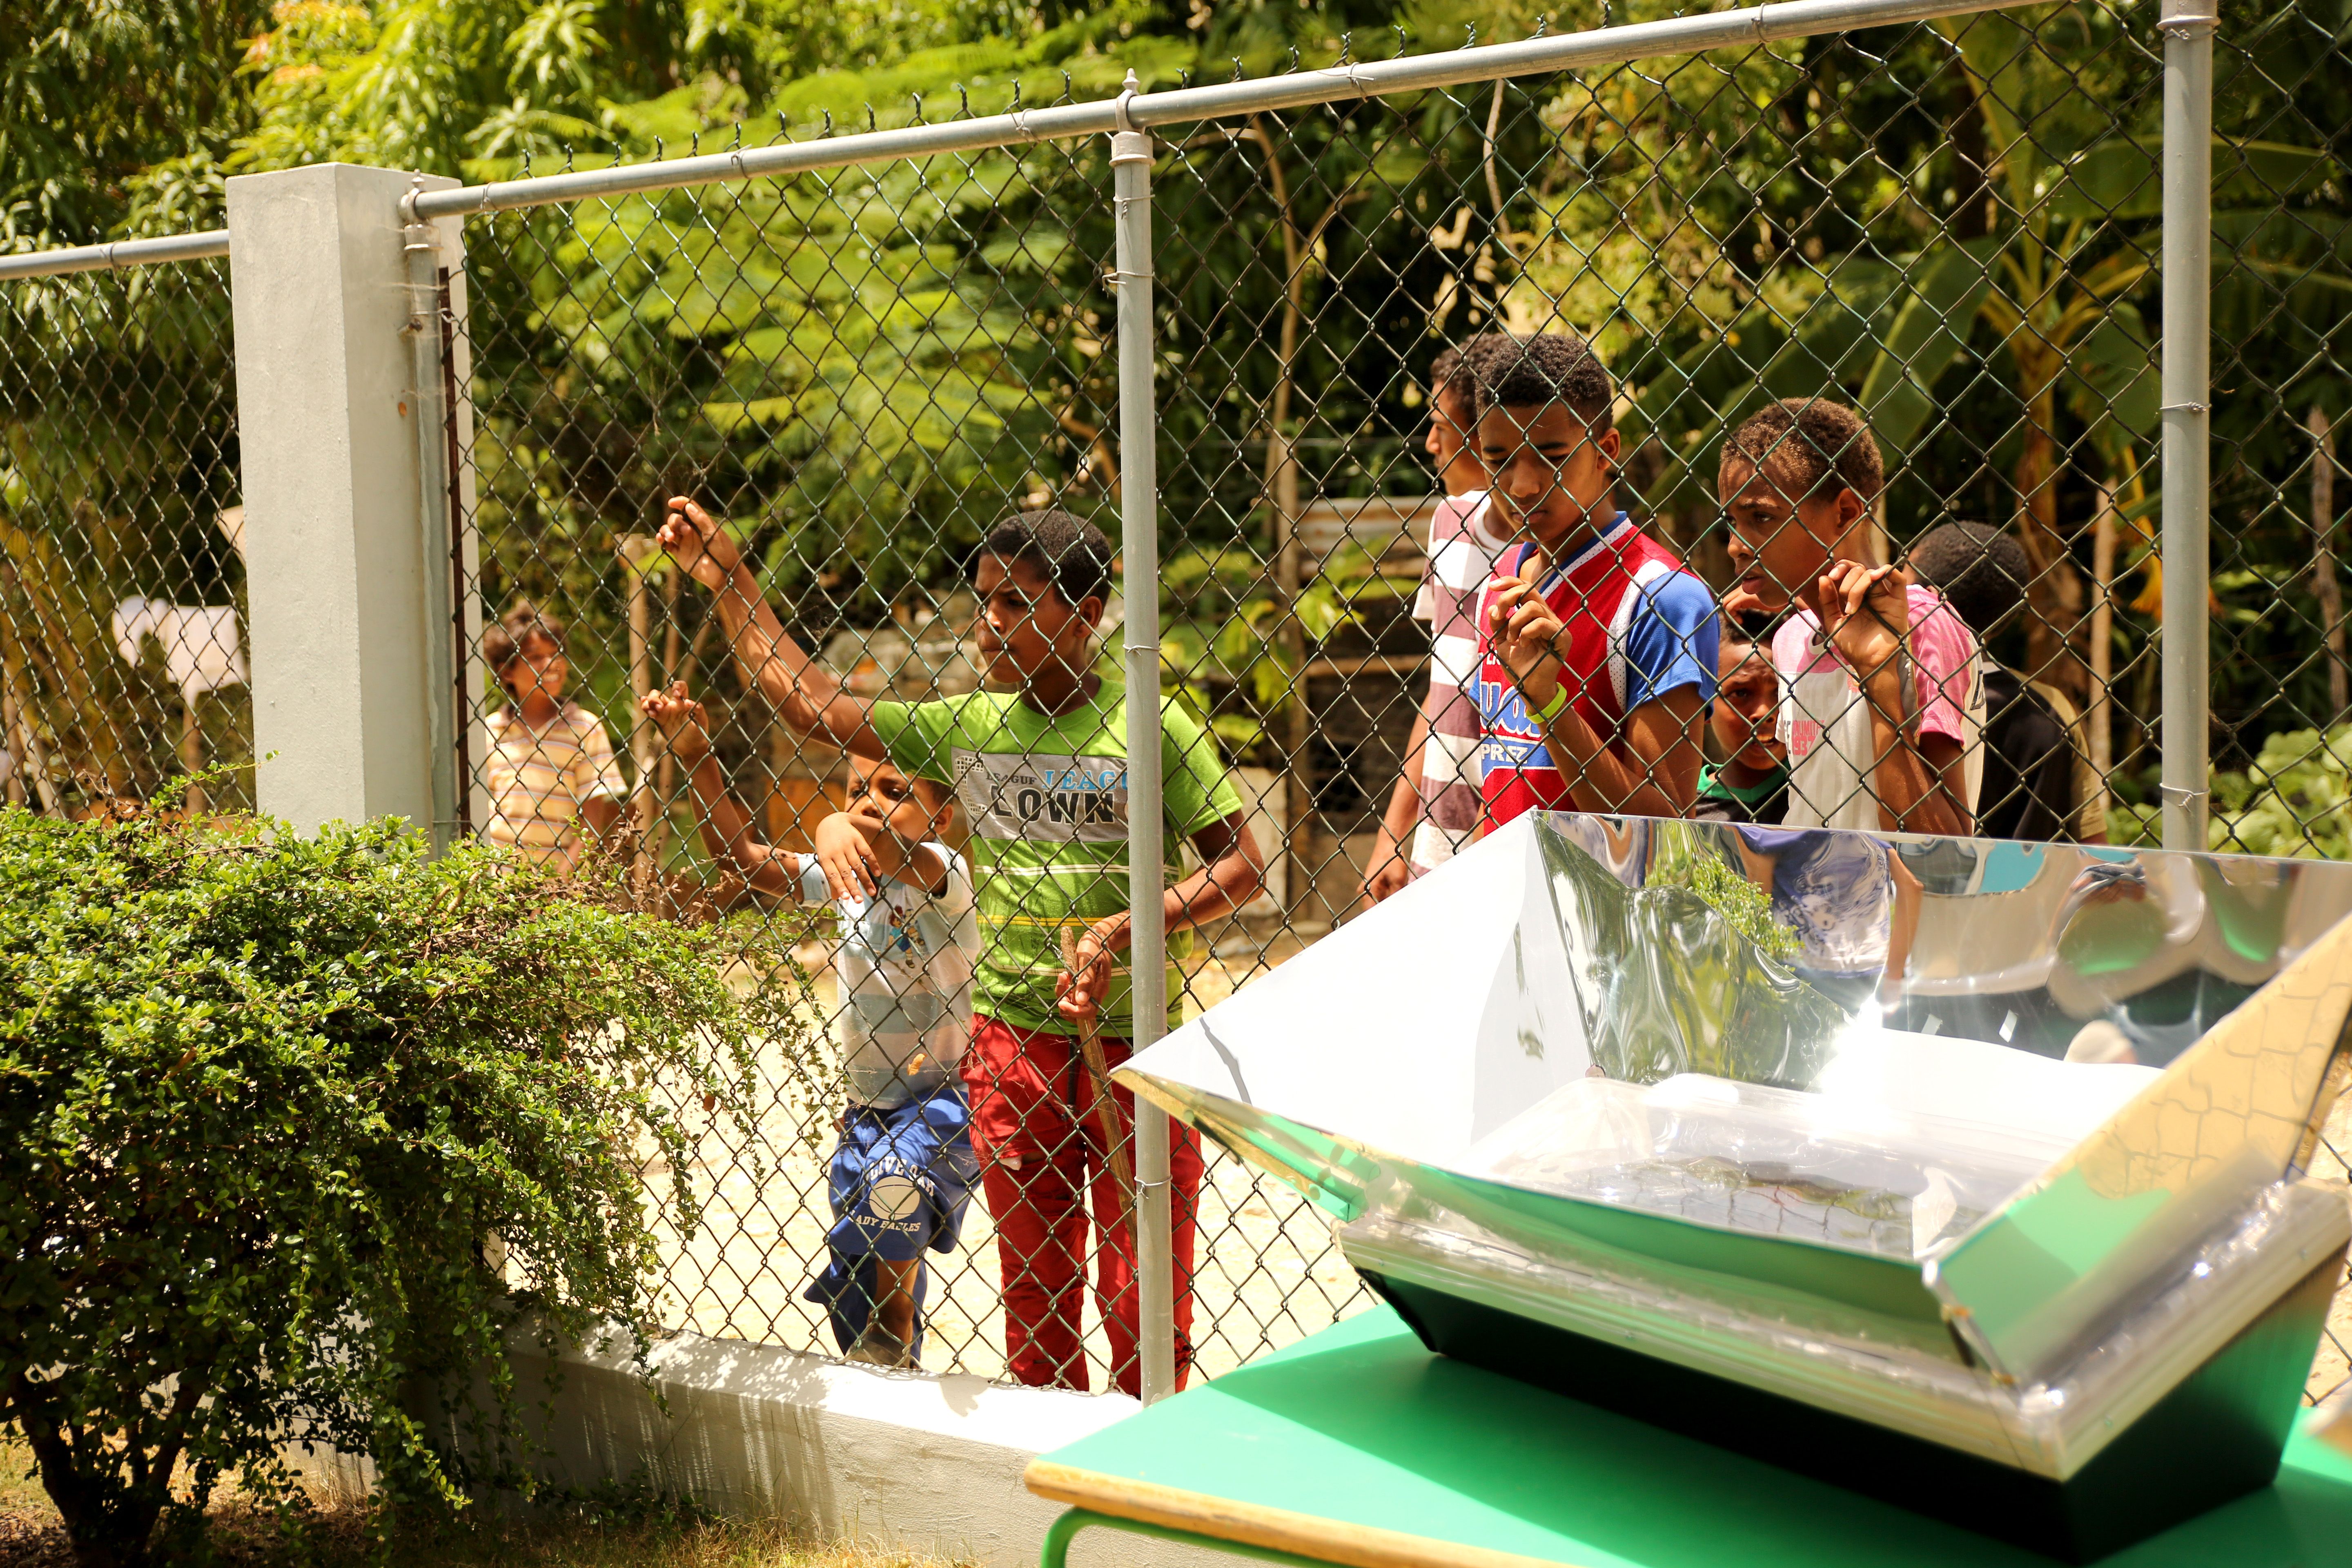 Children watch a solar oven workshop outside the church property